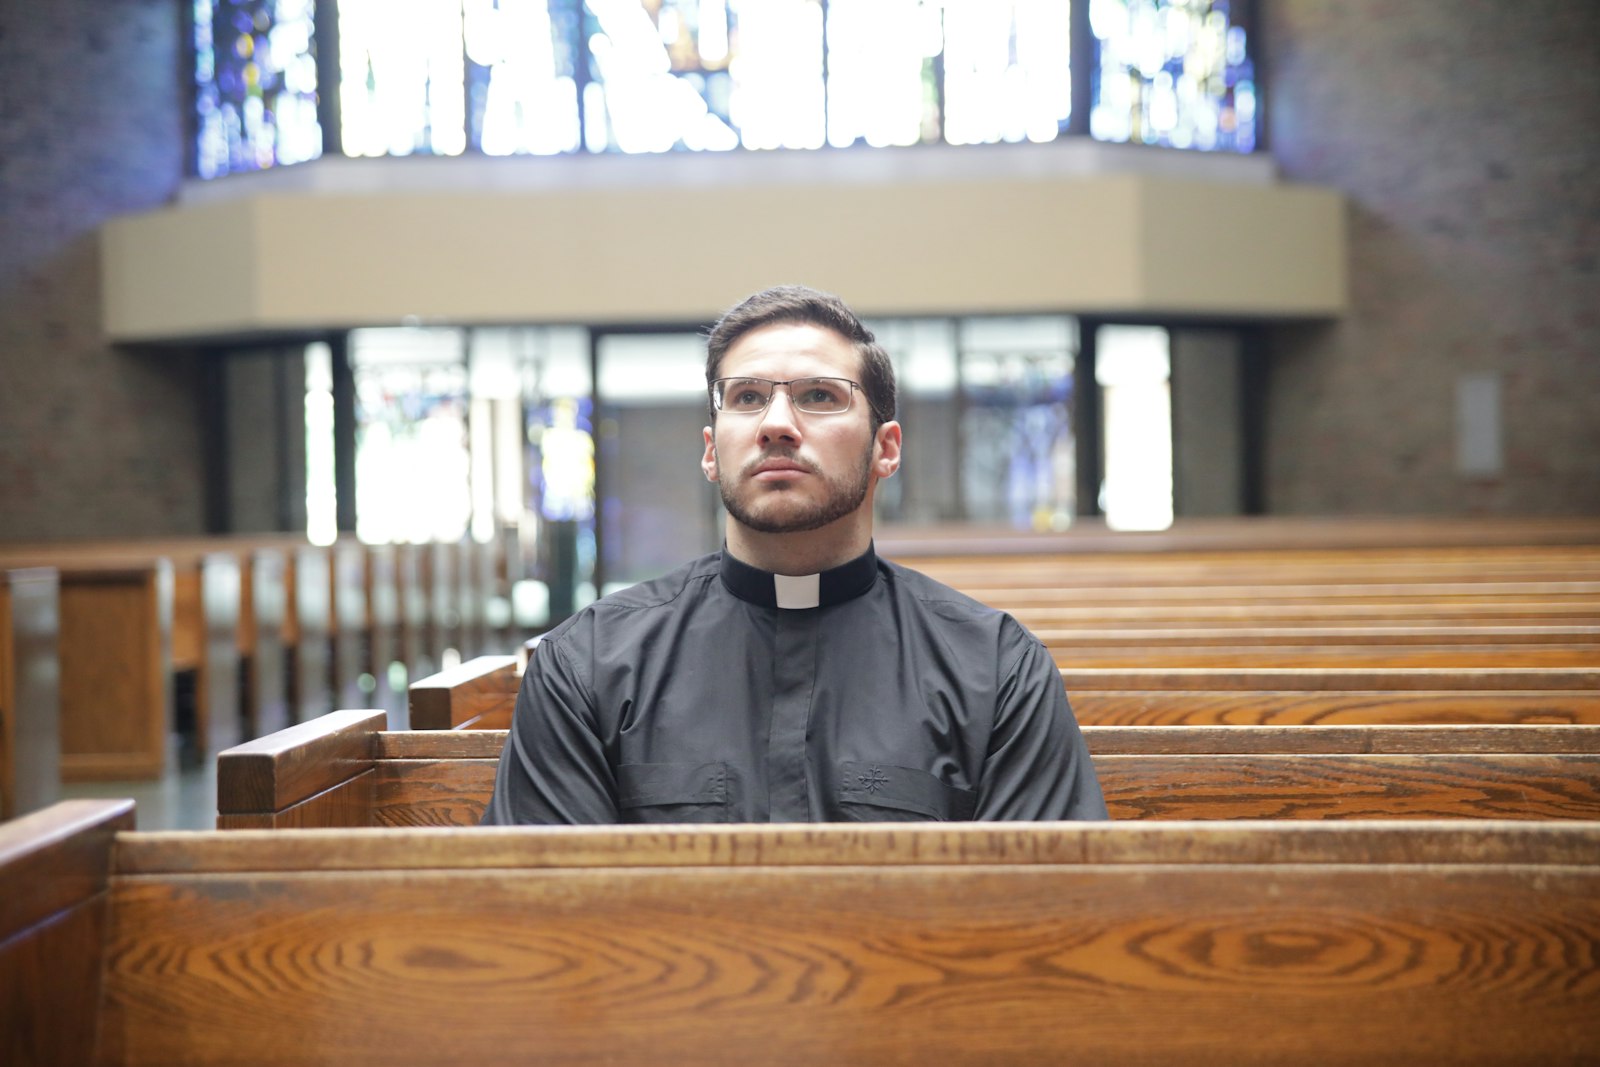 Transitional Deacon Jeremy Schupbach, who is assigned to St. Frances Cabrini Parish in Allen Park for the summer, sits in contemplation at the parish. Deacon Schupbach is helping organize a "24 Hours with the Lord" Eucharistic adoration event at the parish Aug. 4-5.